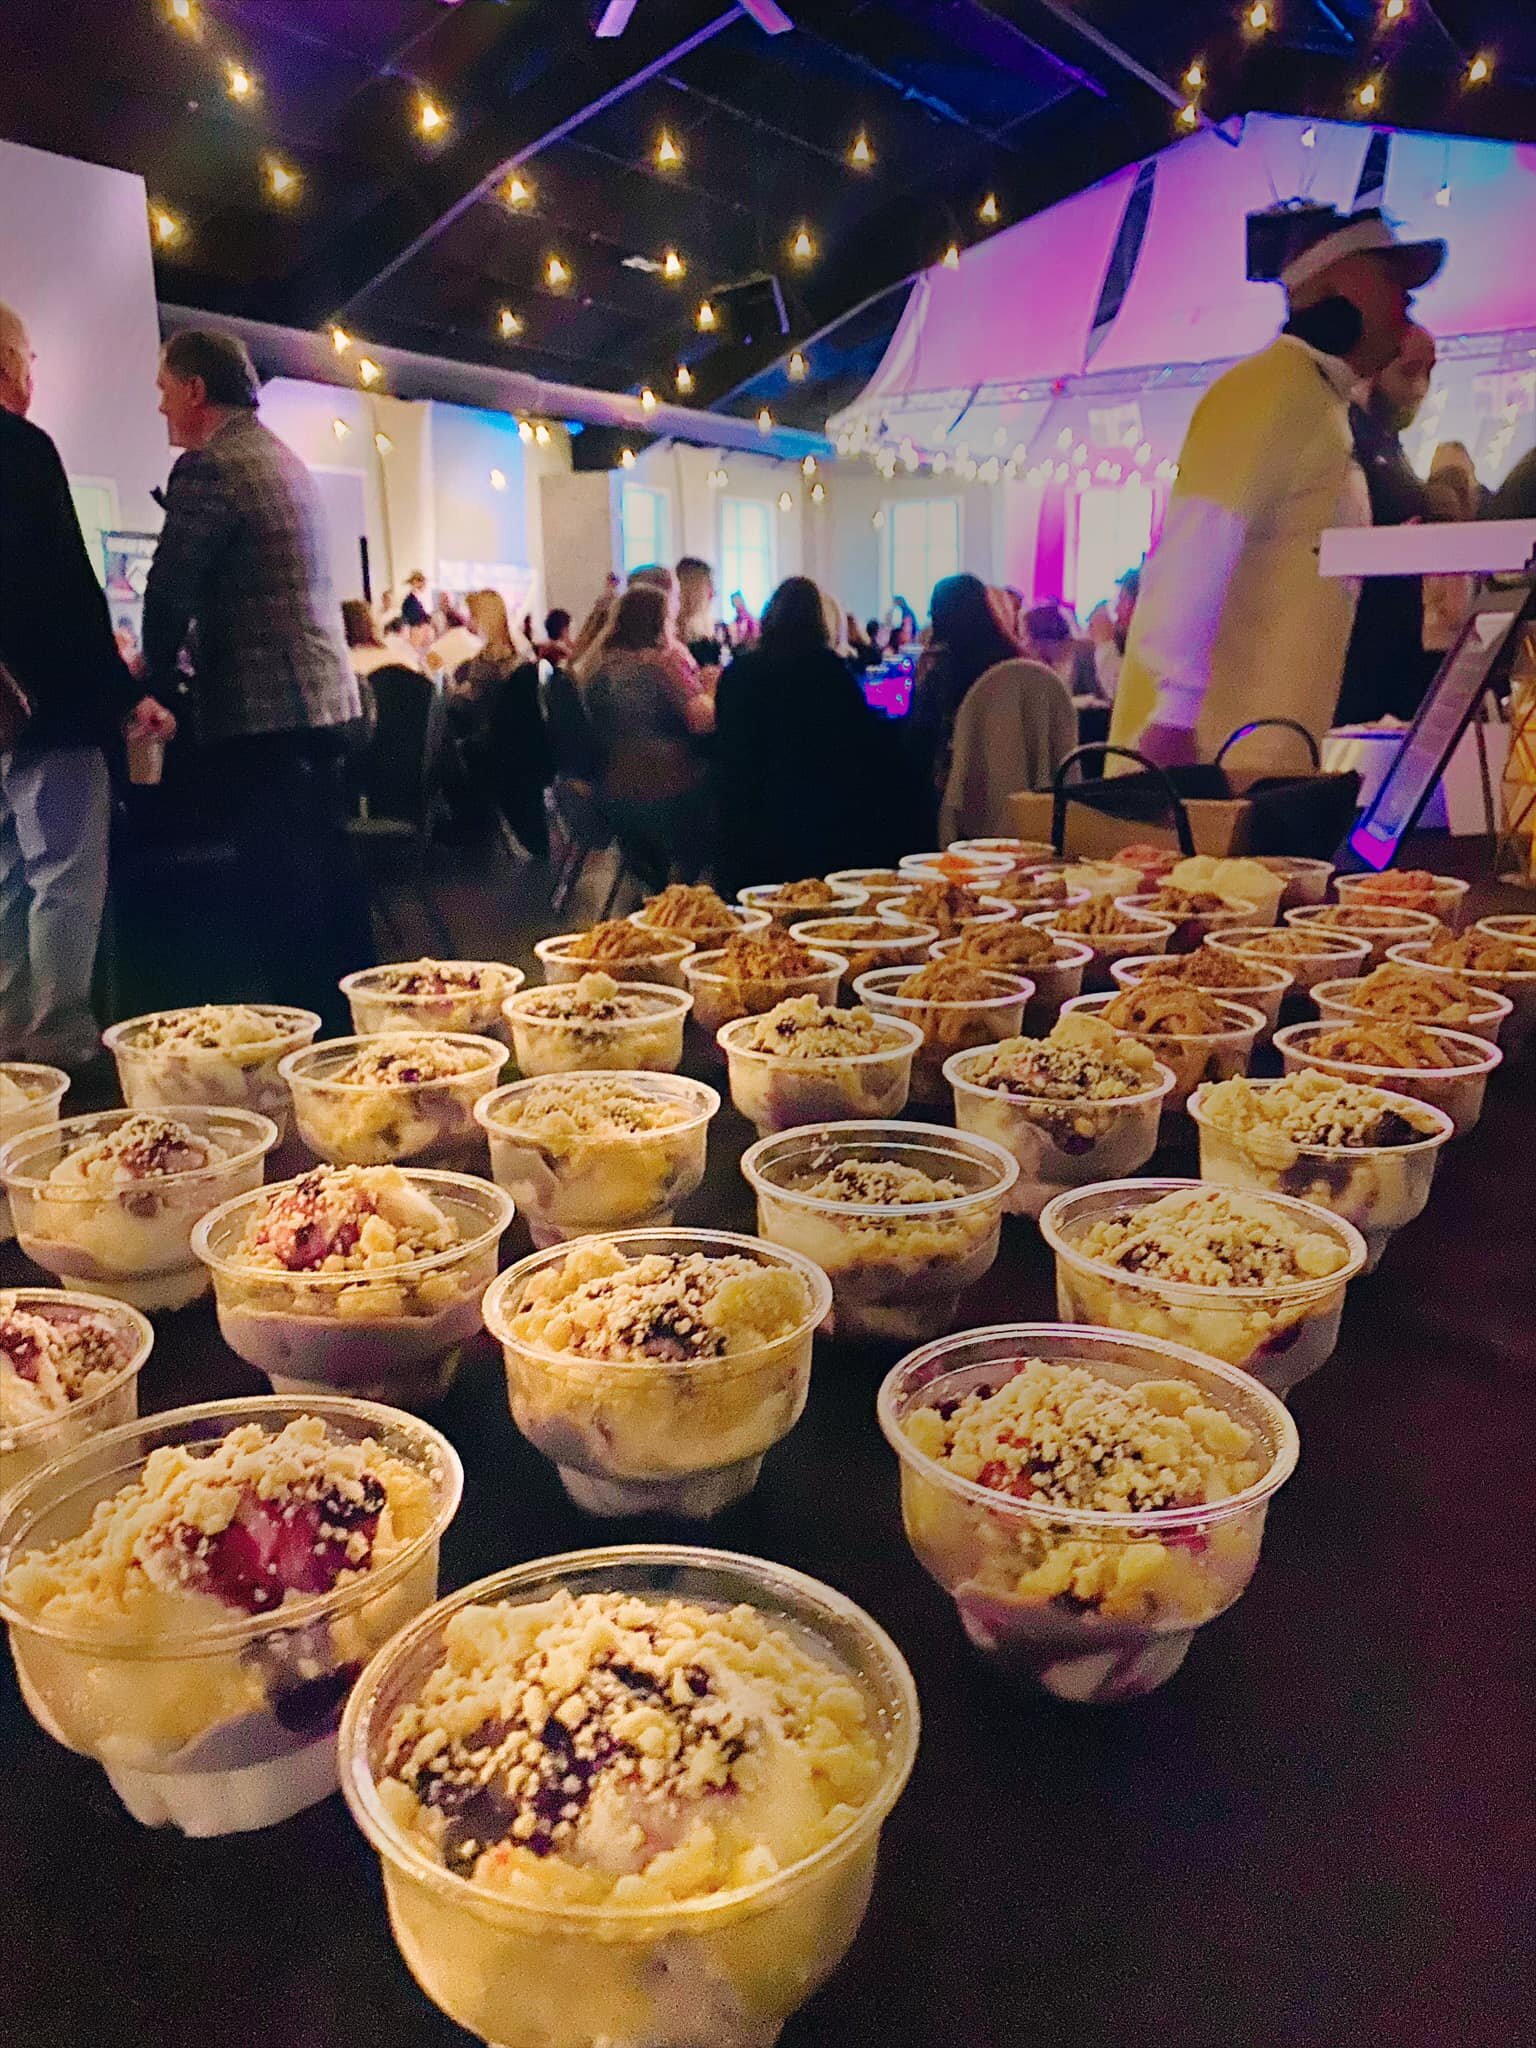 🤩 We had a great time catering our &ldquo;Scoops for a Group&rdquo; for the Boys &amp; Girls Clubs of the Corridor Blue Door Bash fundraiser tonight! 
✅ Great cause
✅ Delicious food from local restaurants 
✅ Gorgeous setting at the Epic Event Center